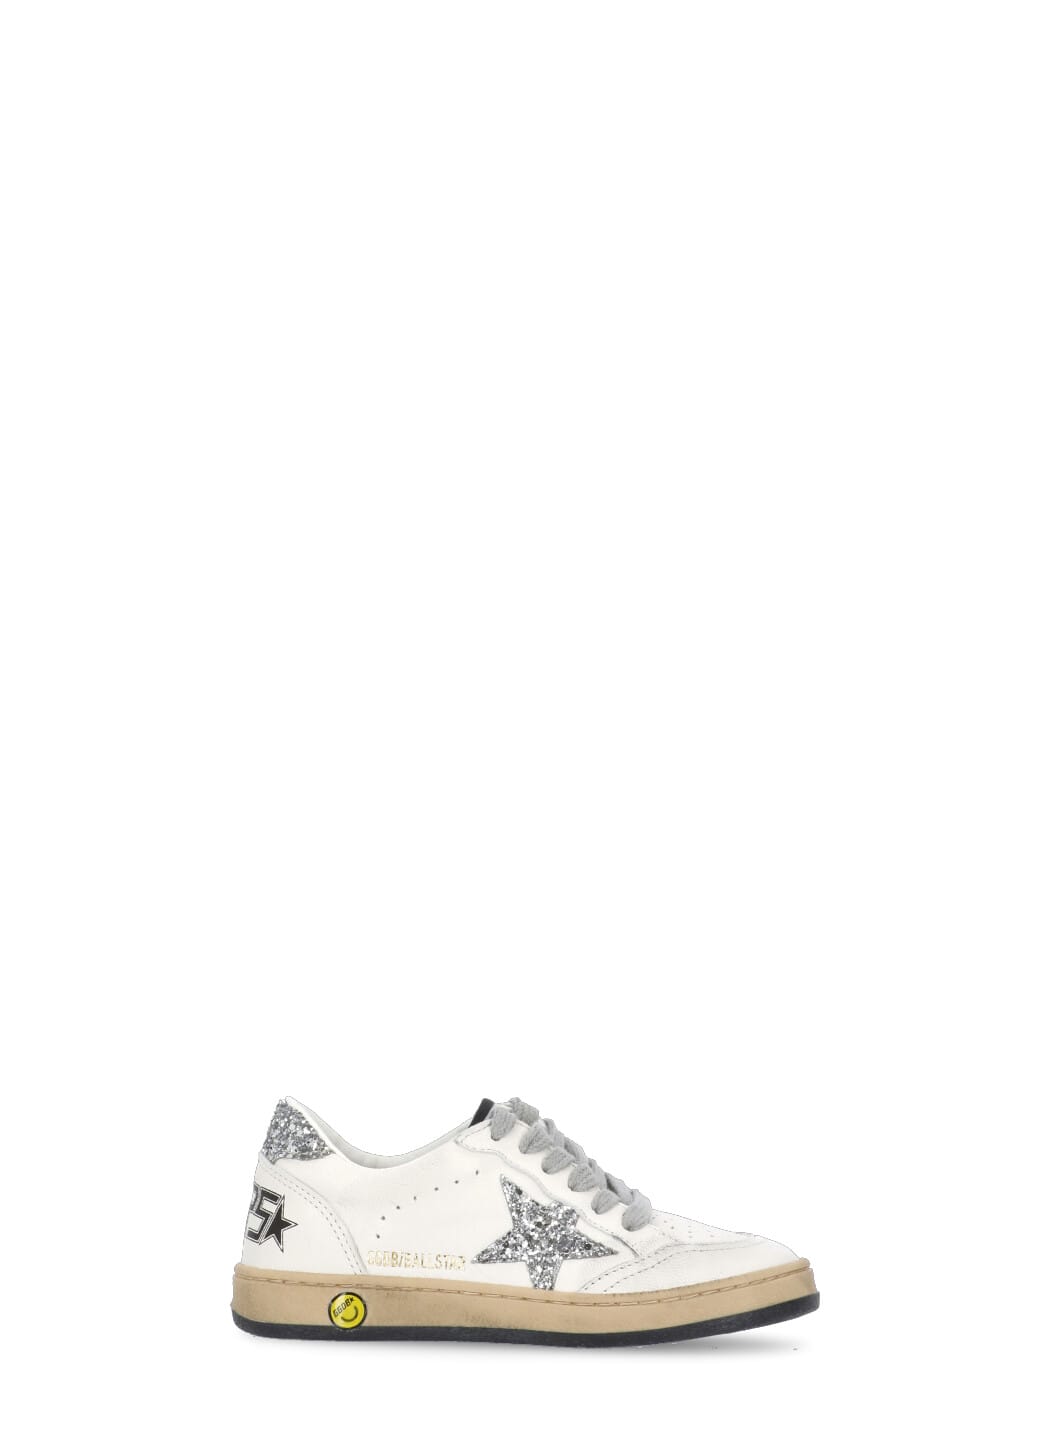 Golden Goose Kids' Ball Star Leather And Glitter Sneakers In White